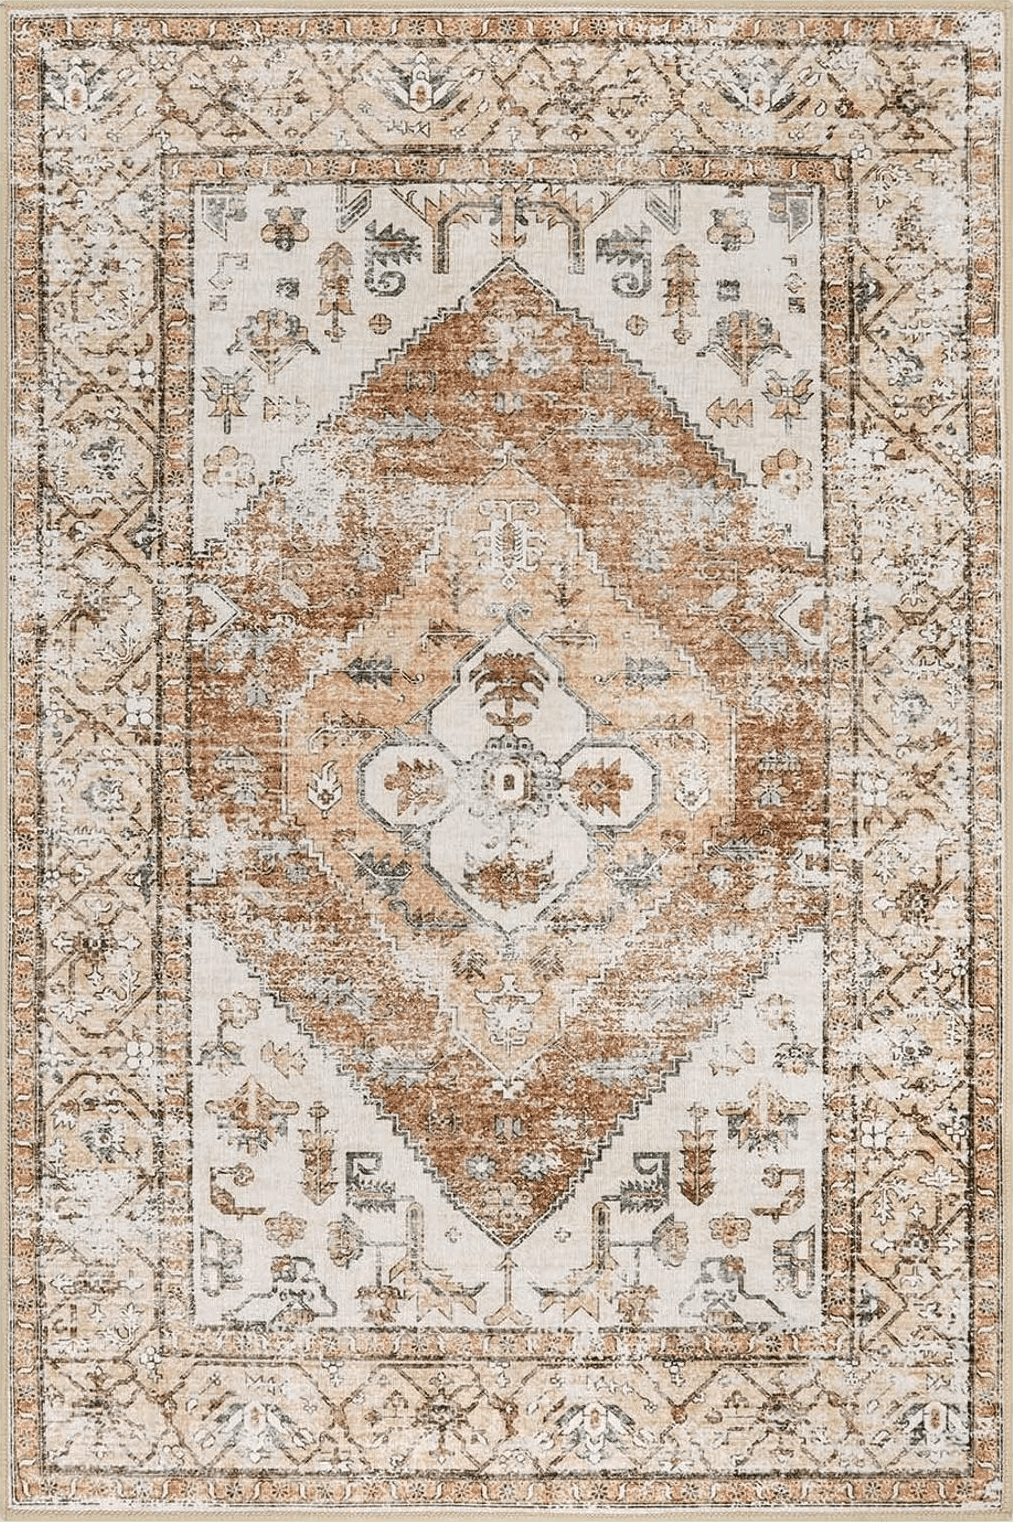 Vintage Lahome Boho Kitchen Rugs Washable - 2x3 Small Non-Slip Entry Rugs for Inside House Oriental Throw Area Rugs for Bedroom Accent Distressed Floor Doormat Carpet for Bathroom Entryway Laundry Living Room